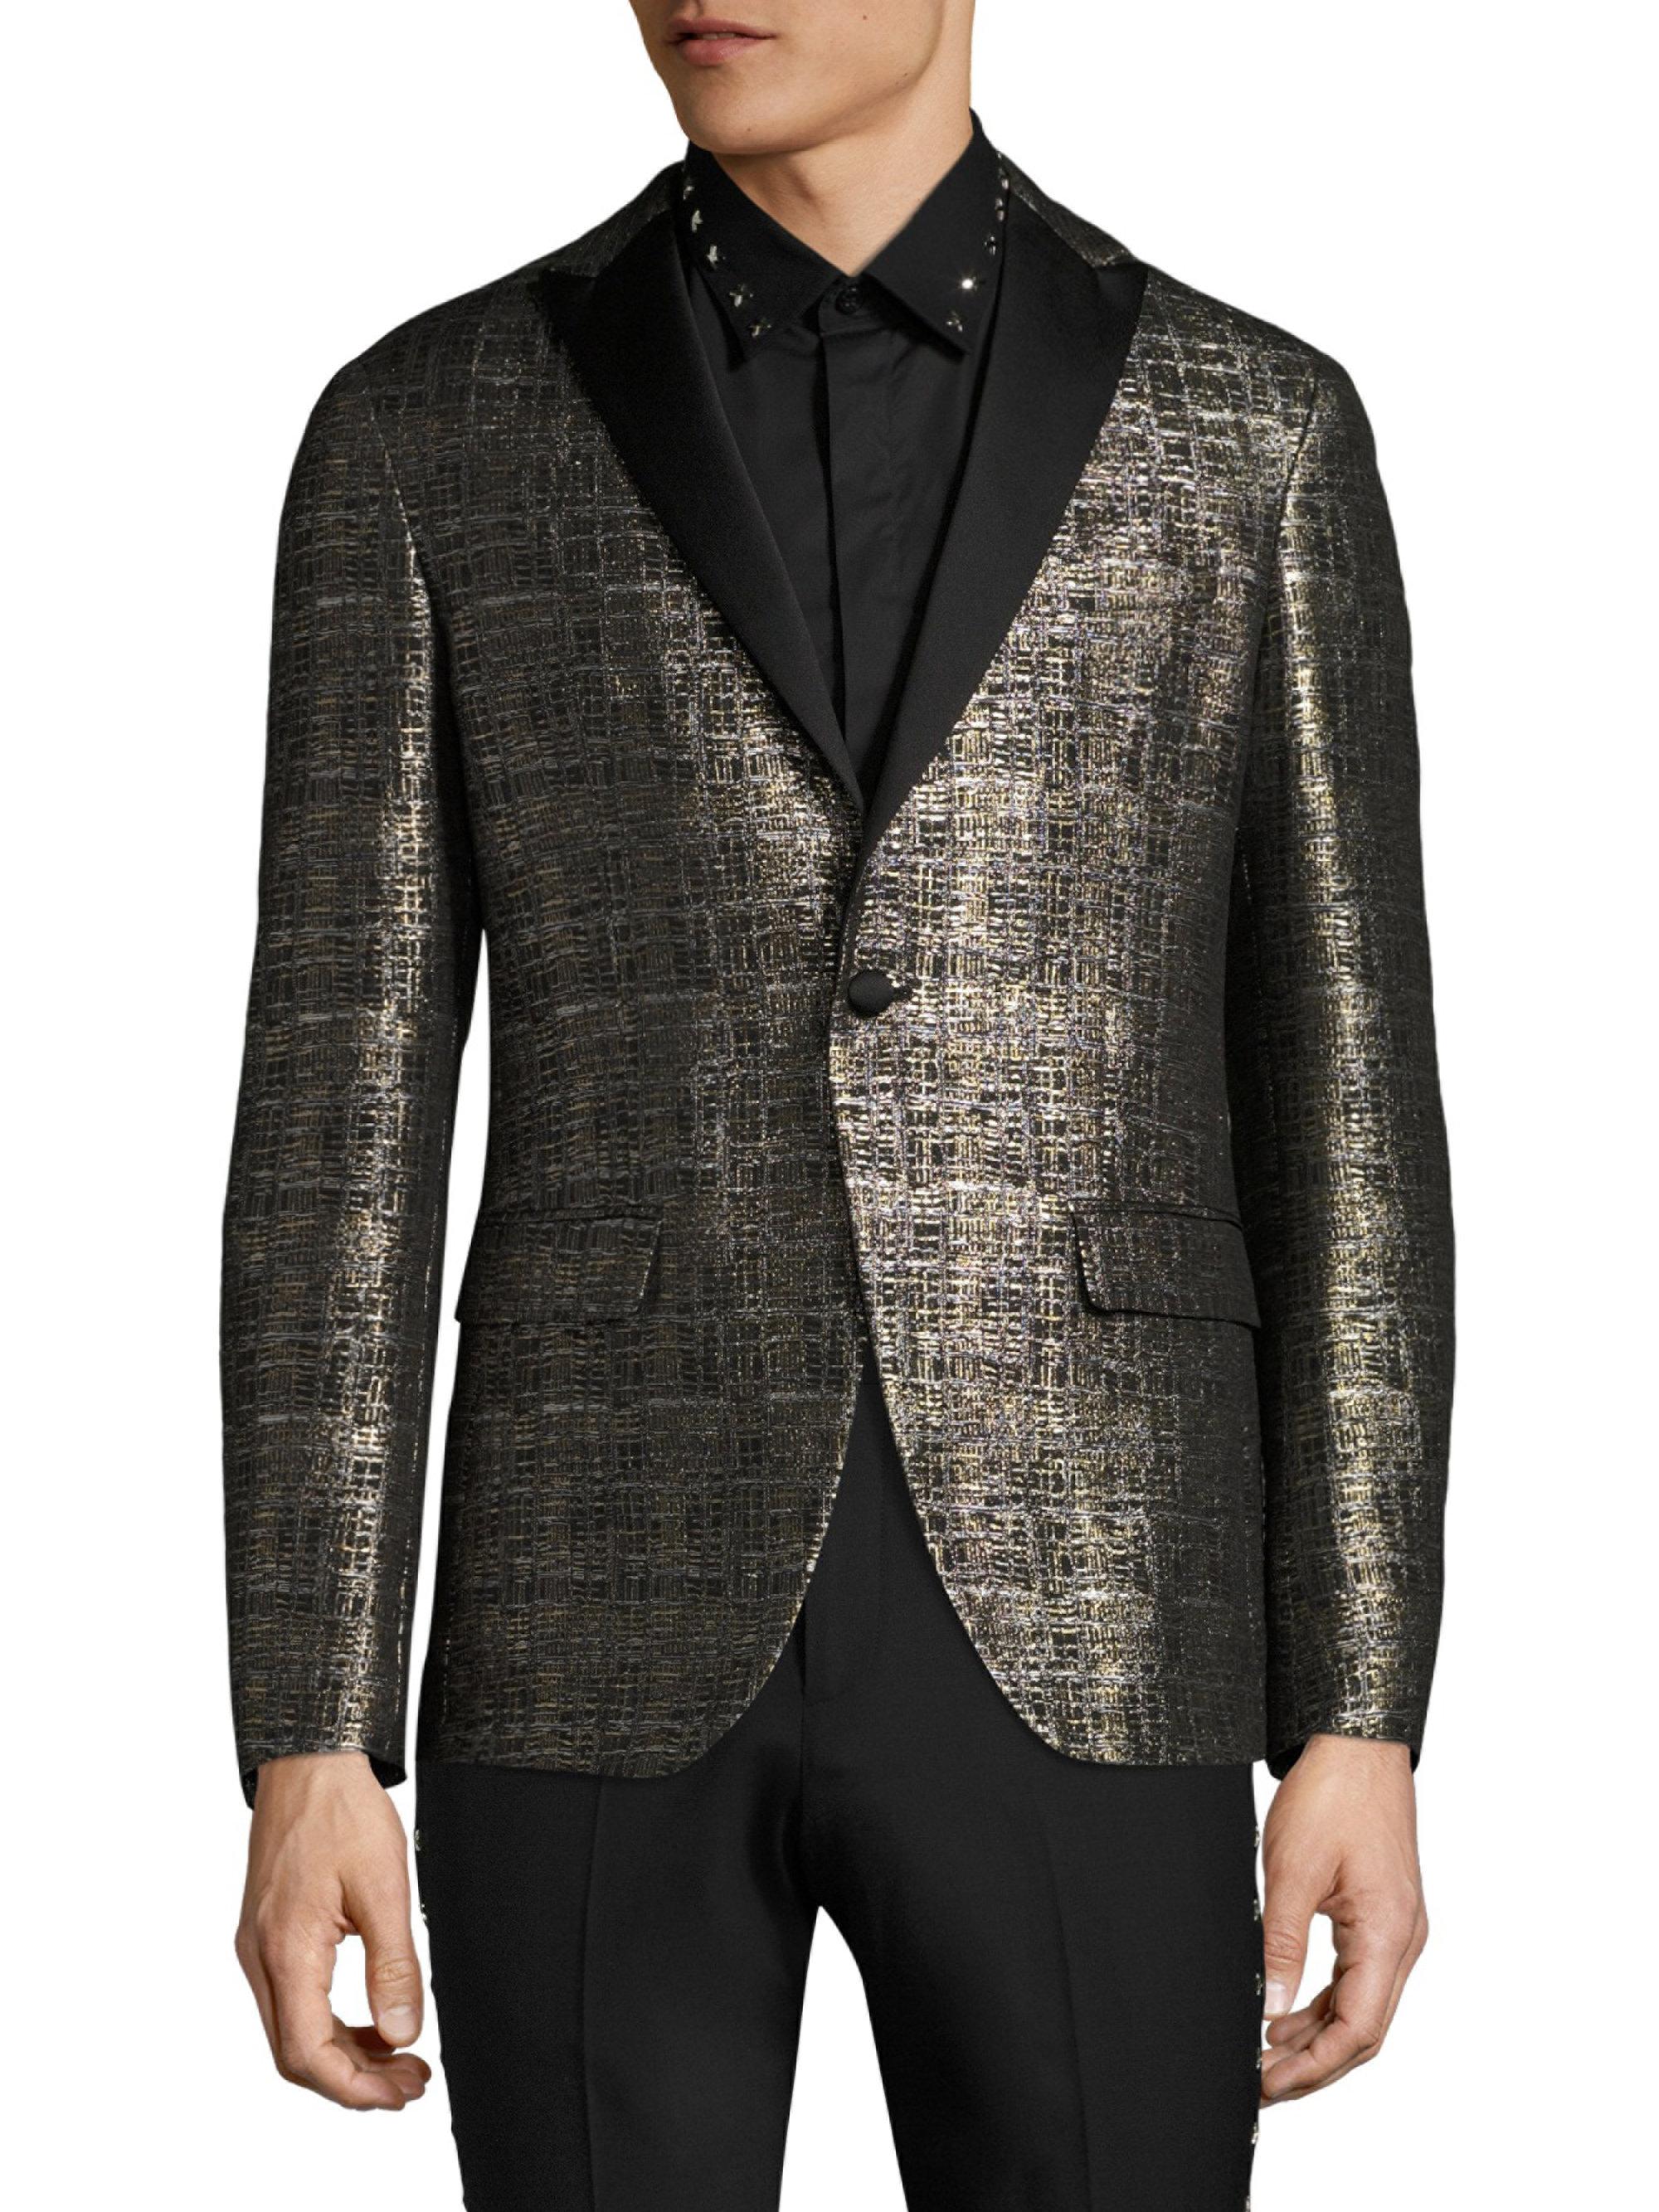 Versace Synthetic Evening Jacket in Black-Grey (Black) for Men - Lyst